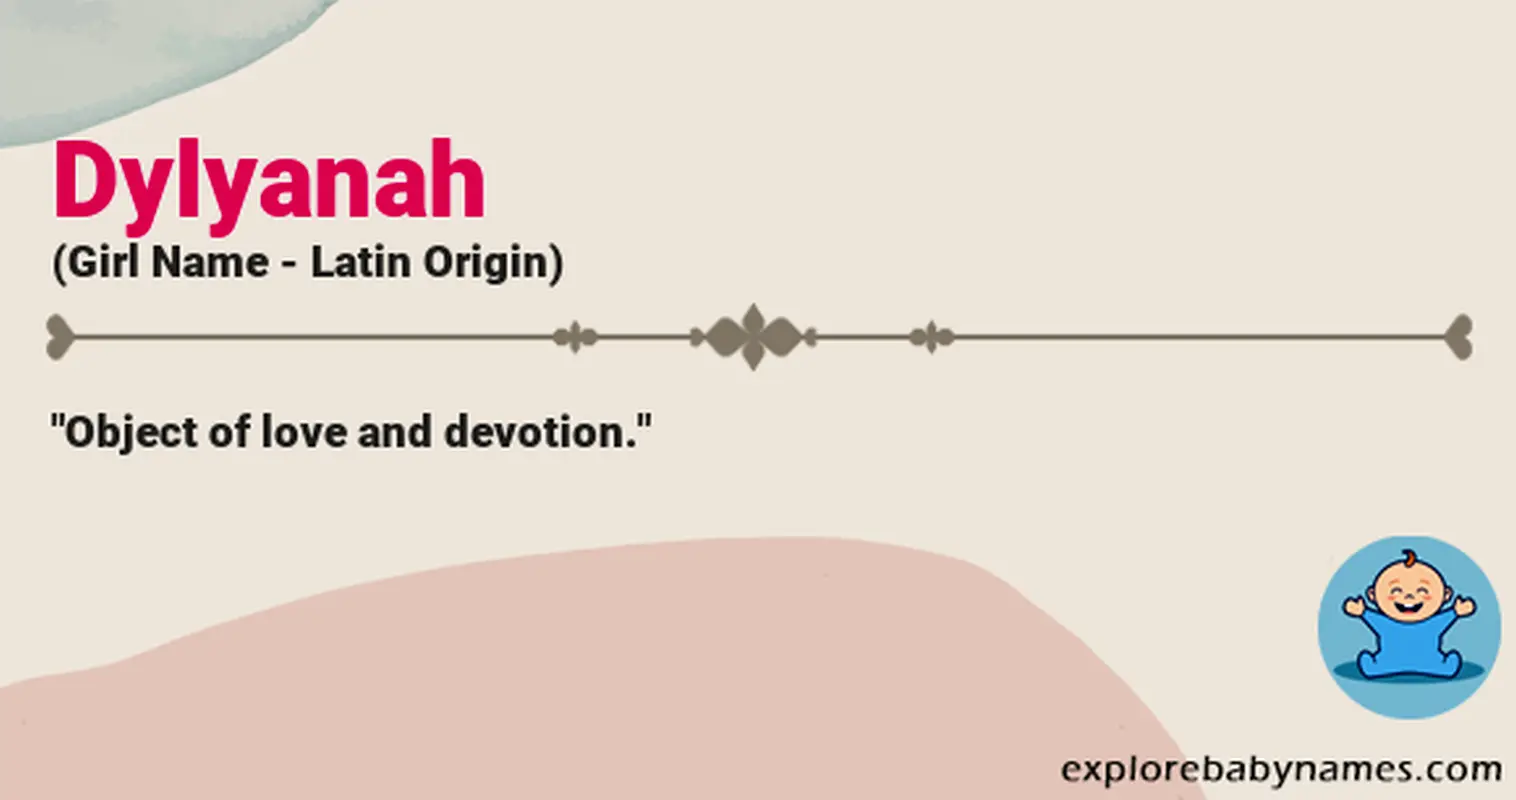 Meaning of Dylyanah